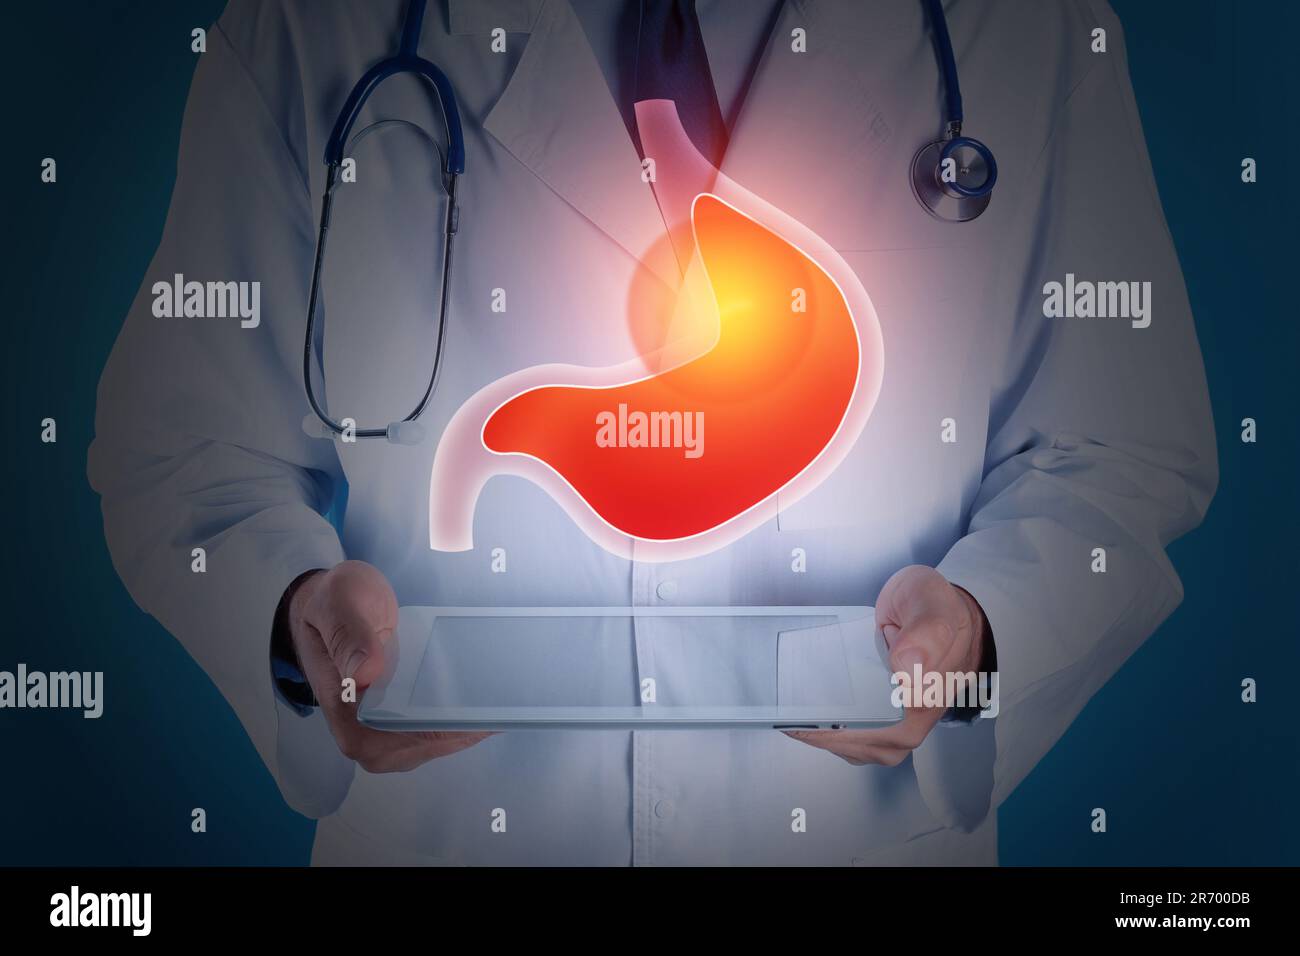 Treatment of heartburn and other gastrointestinal diseases. Doctor using tablet on dark background, closeup. Stomach illustration over device Stock Photo